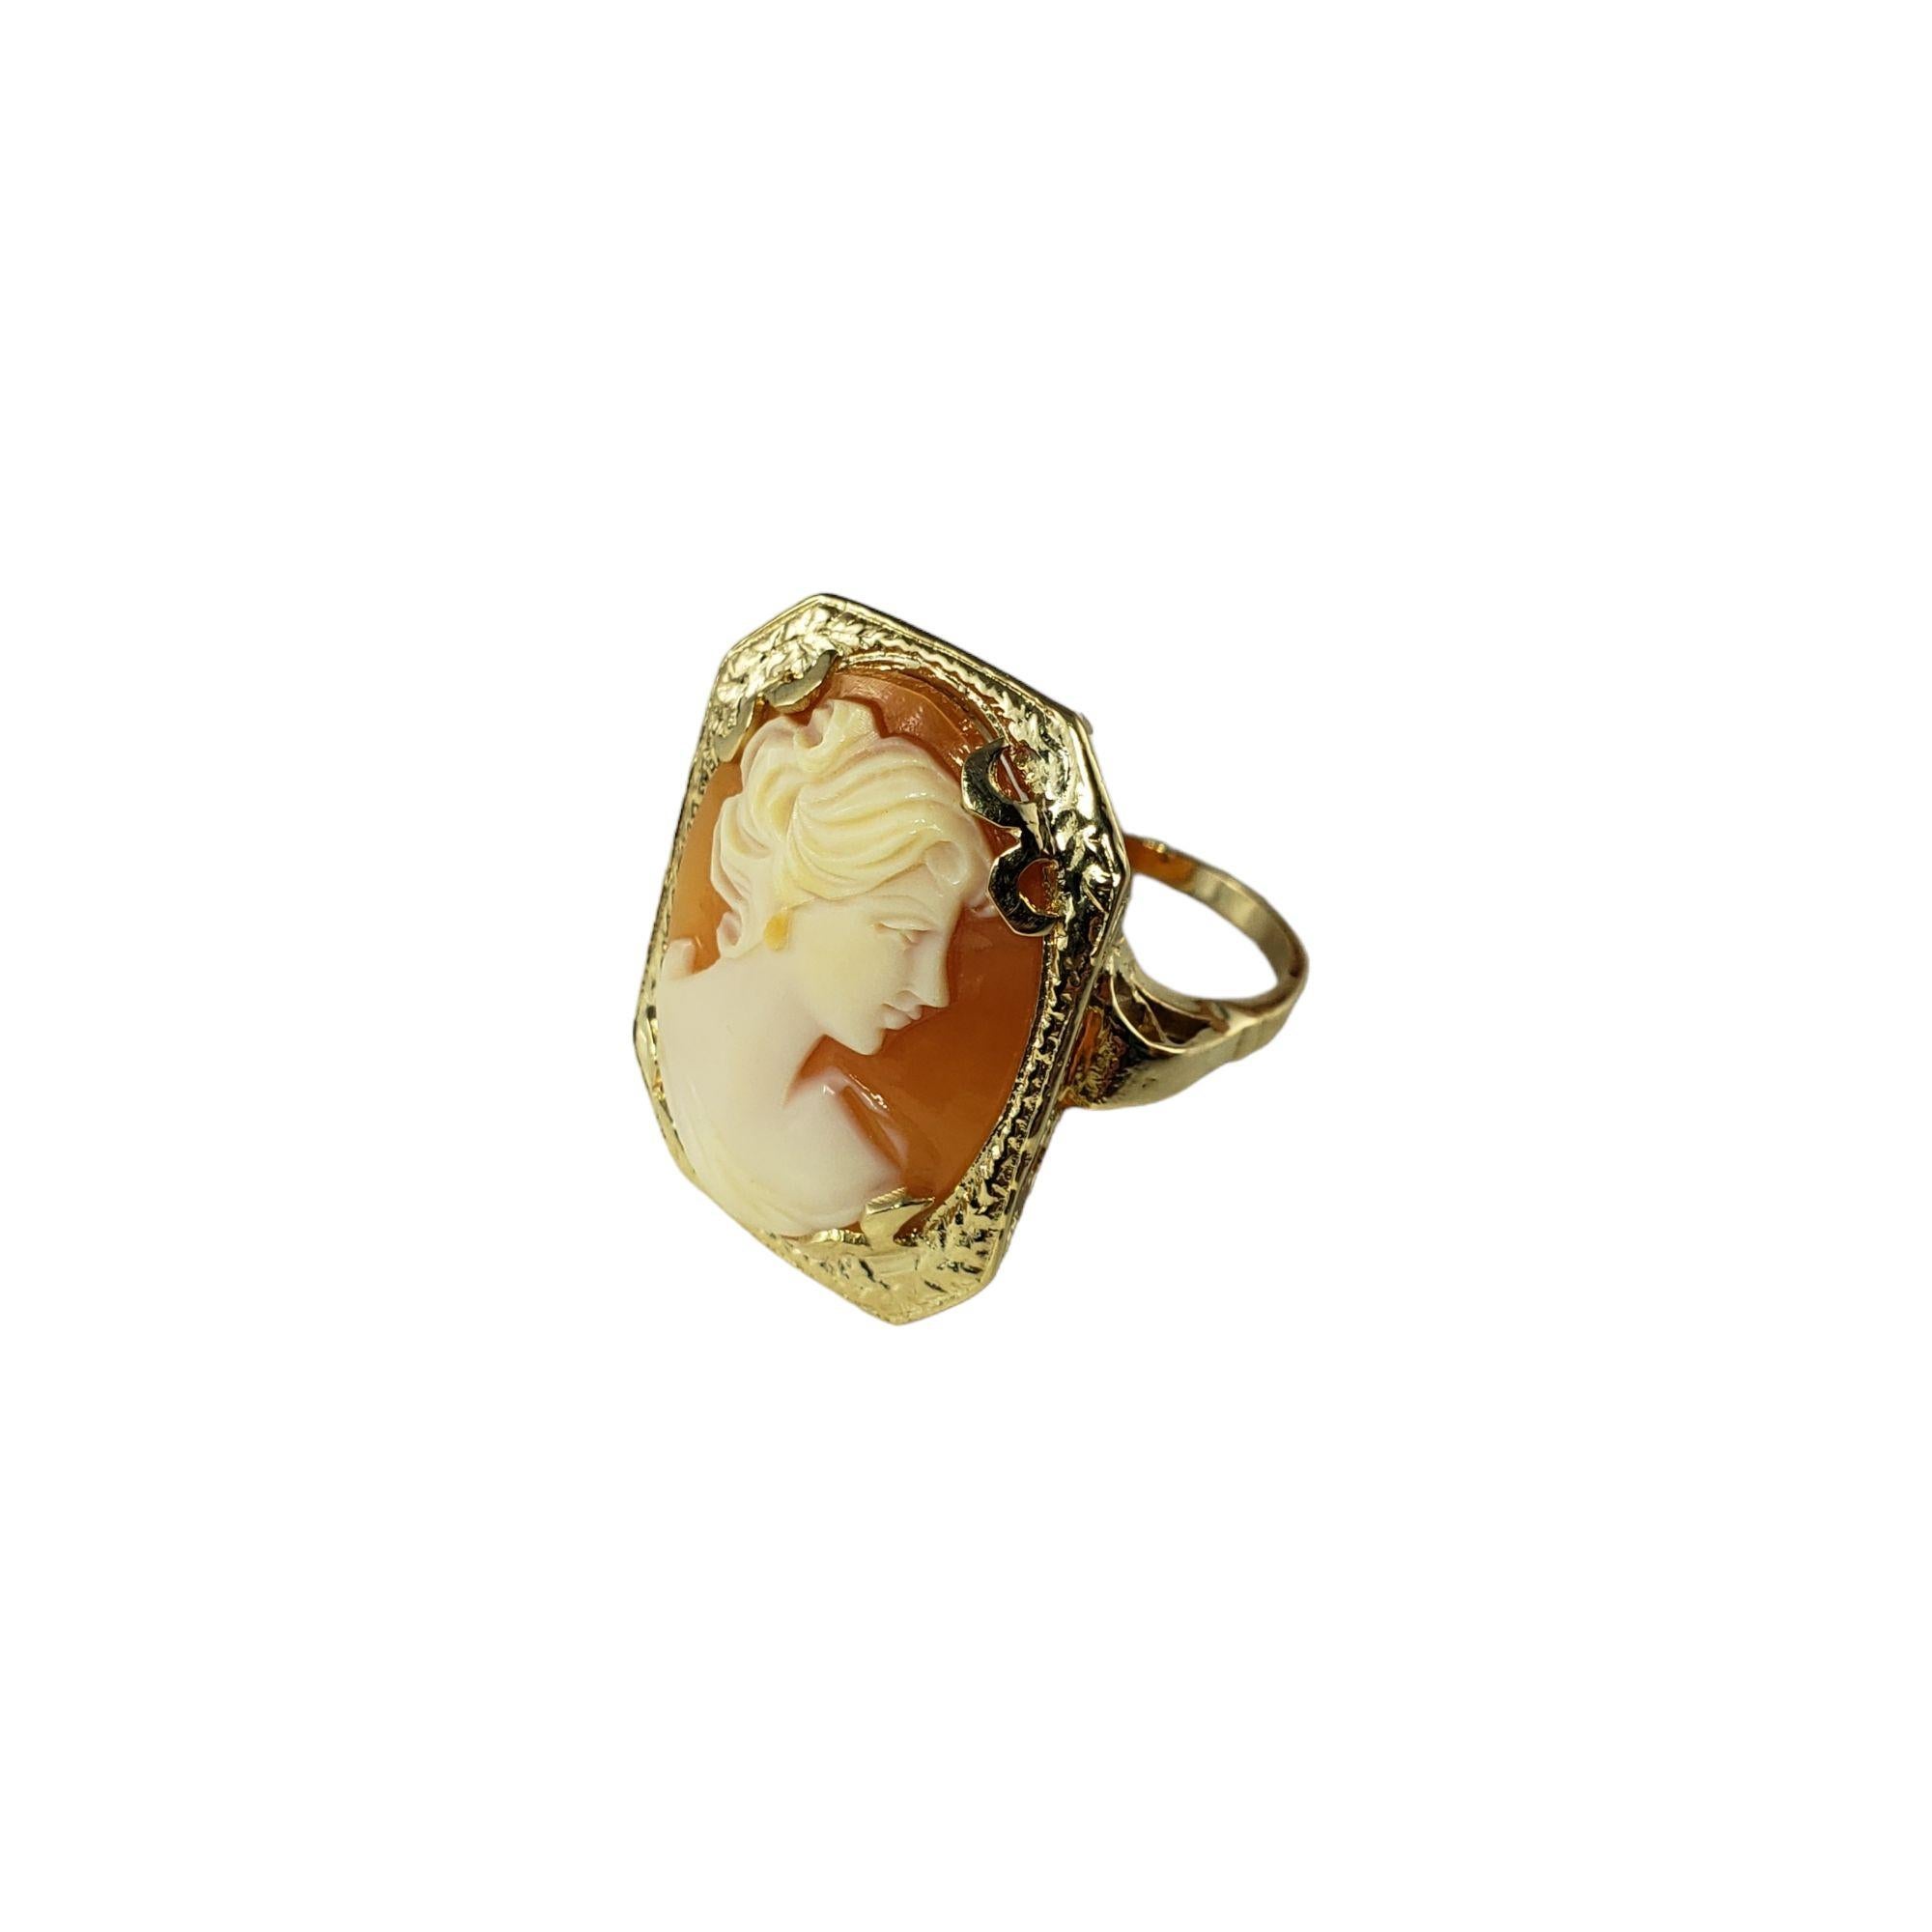 Vintage 14 Karat Yellow Gold Cameo Ring Size 10-

This stunning cameo ring features a lovely lady in profile set in beautifully detailed 14K yellow gold. Top of ring measures
28 mm x 22 mm. Shank: 2 mm.

Ring Size: 10

Weight: 11.7 gr./ 7.5